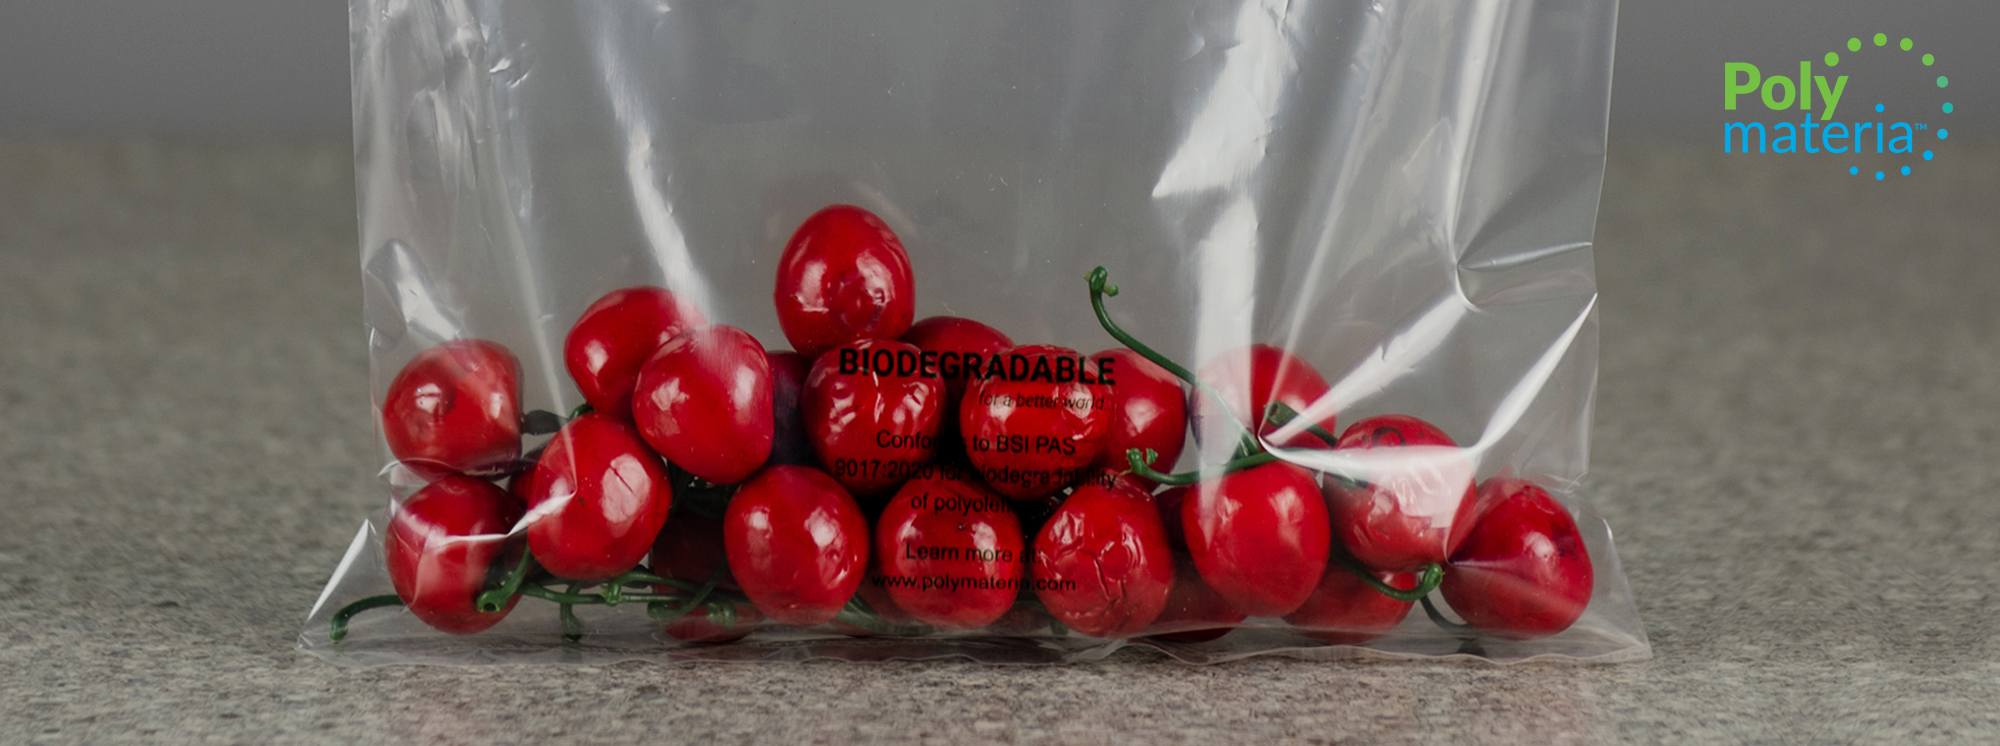 Biodegradable packing bag containing cherries